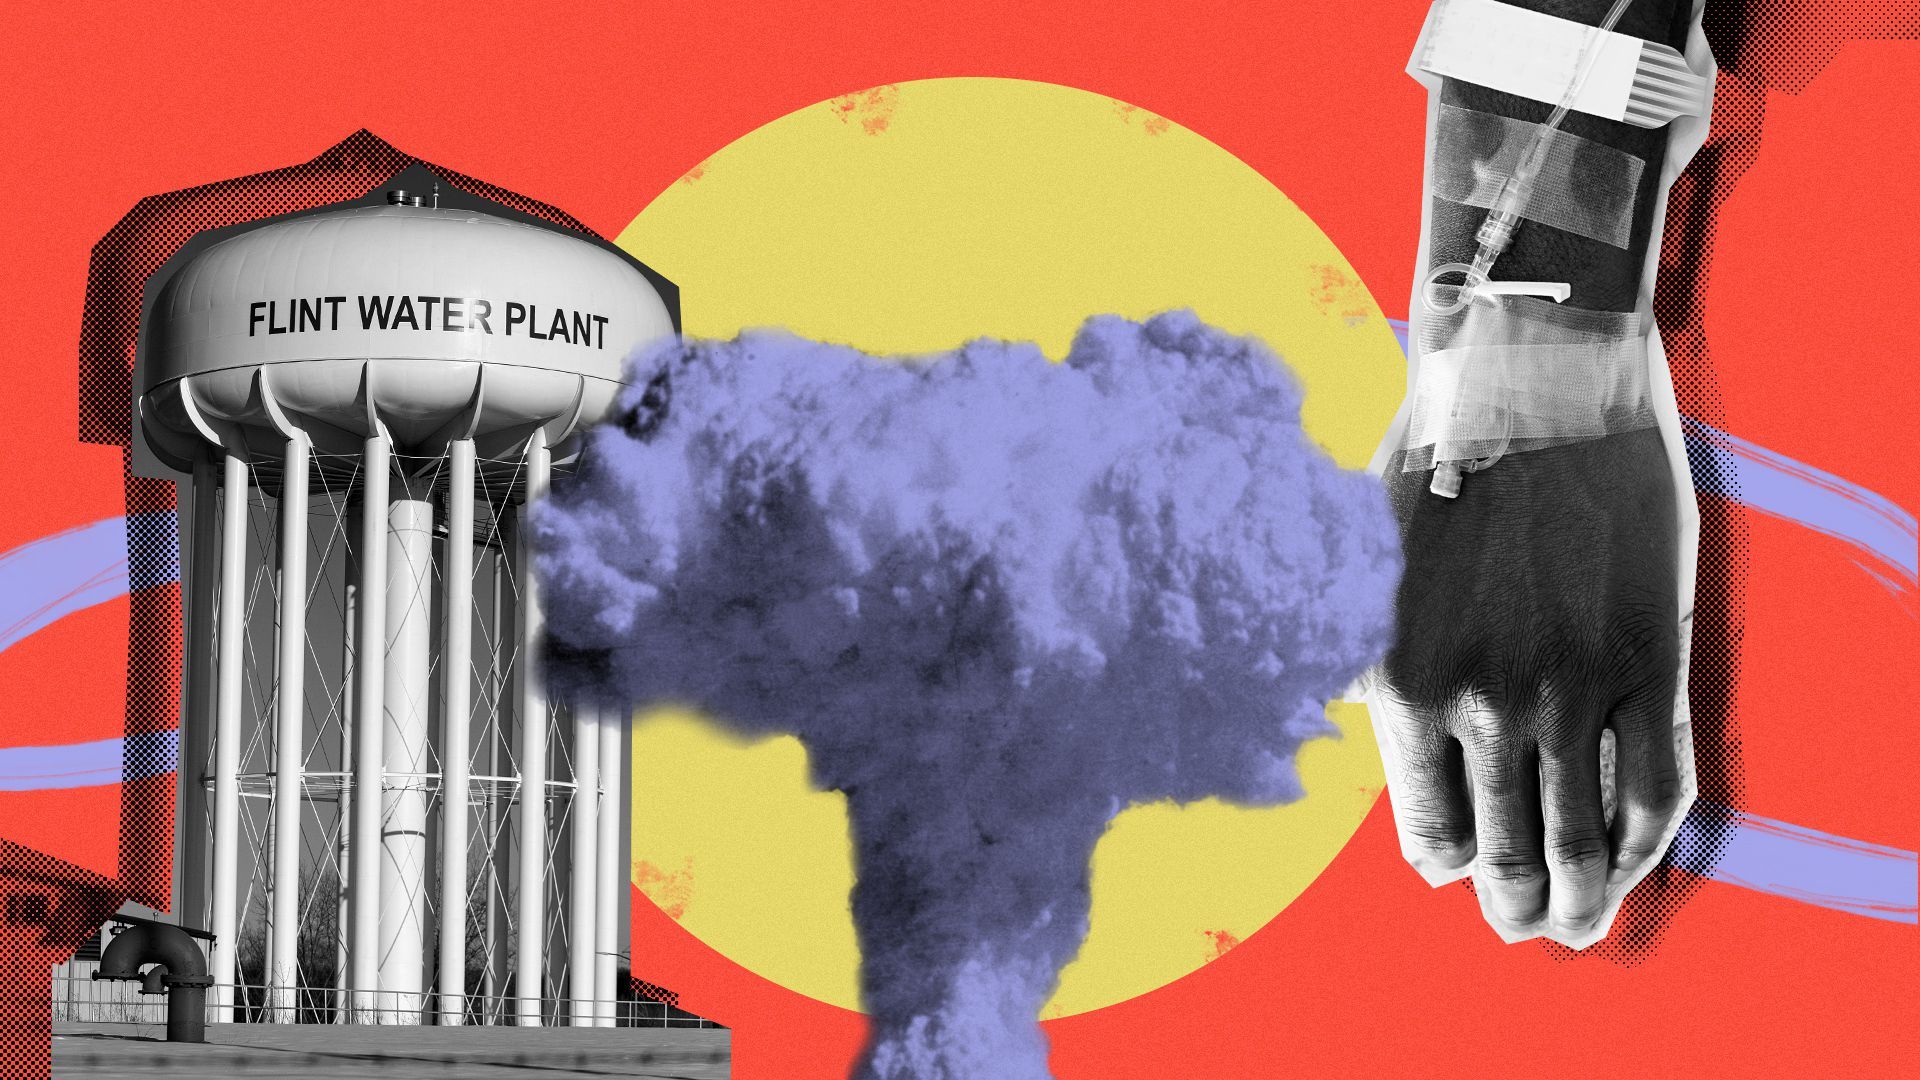 Photo illustration of a nuclear mushroom cloud, the Flint Water Plant water tower, and a hand with an i.v.